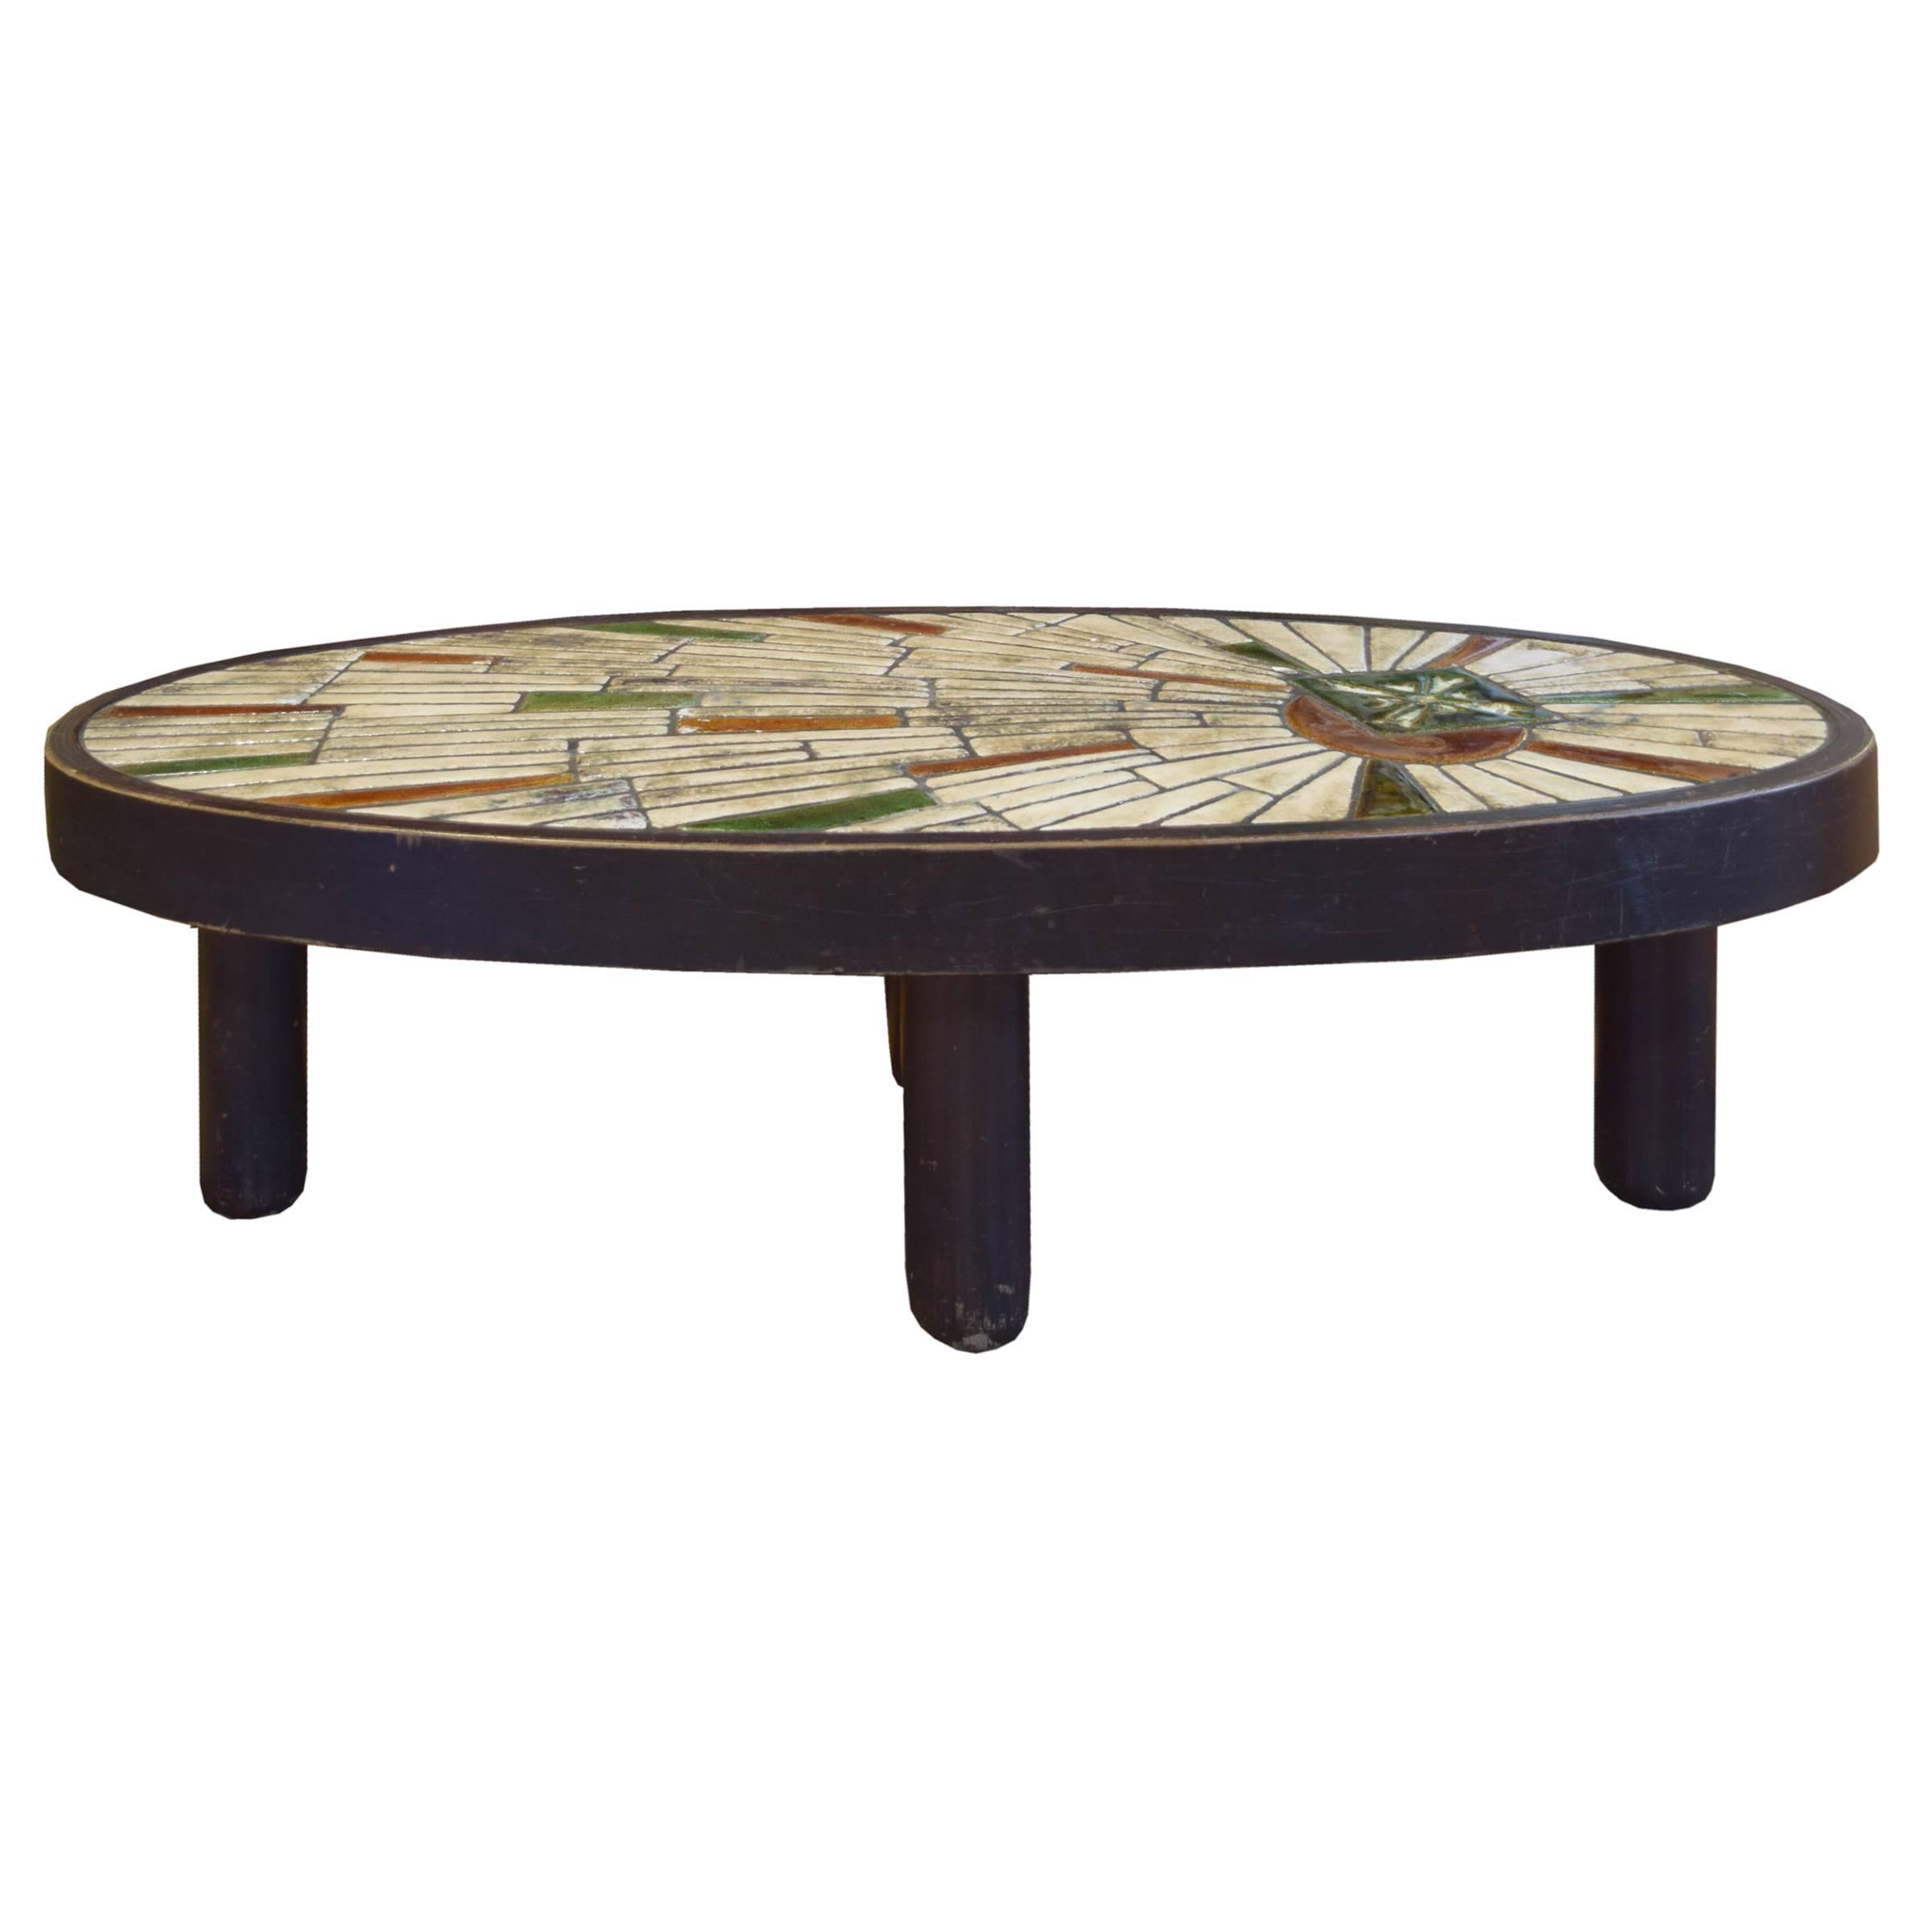 French Midcentury Wood and Tile Table by Barrois for Vallauris